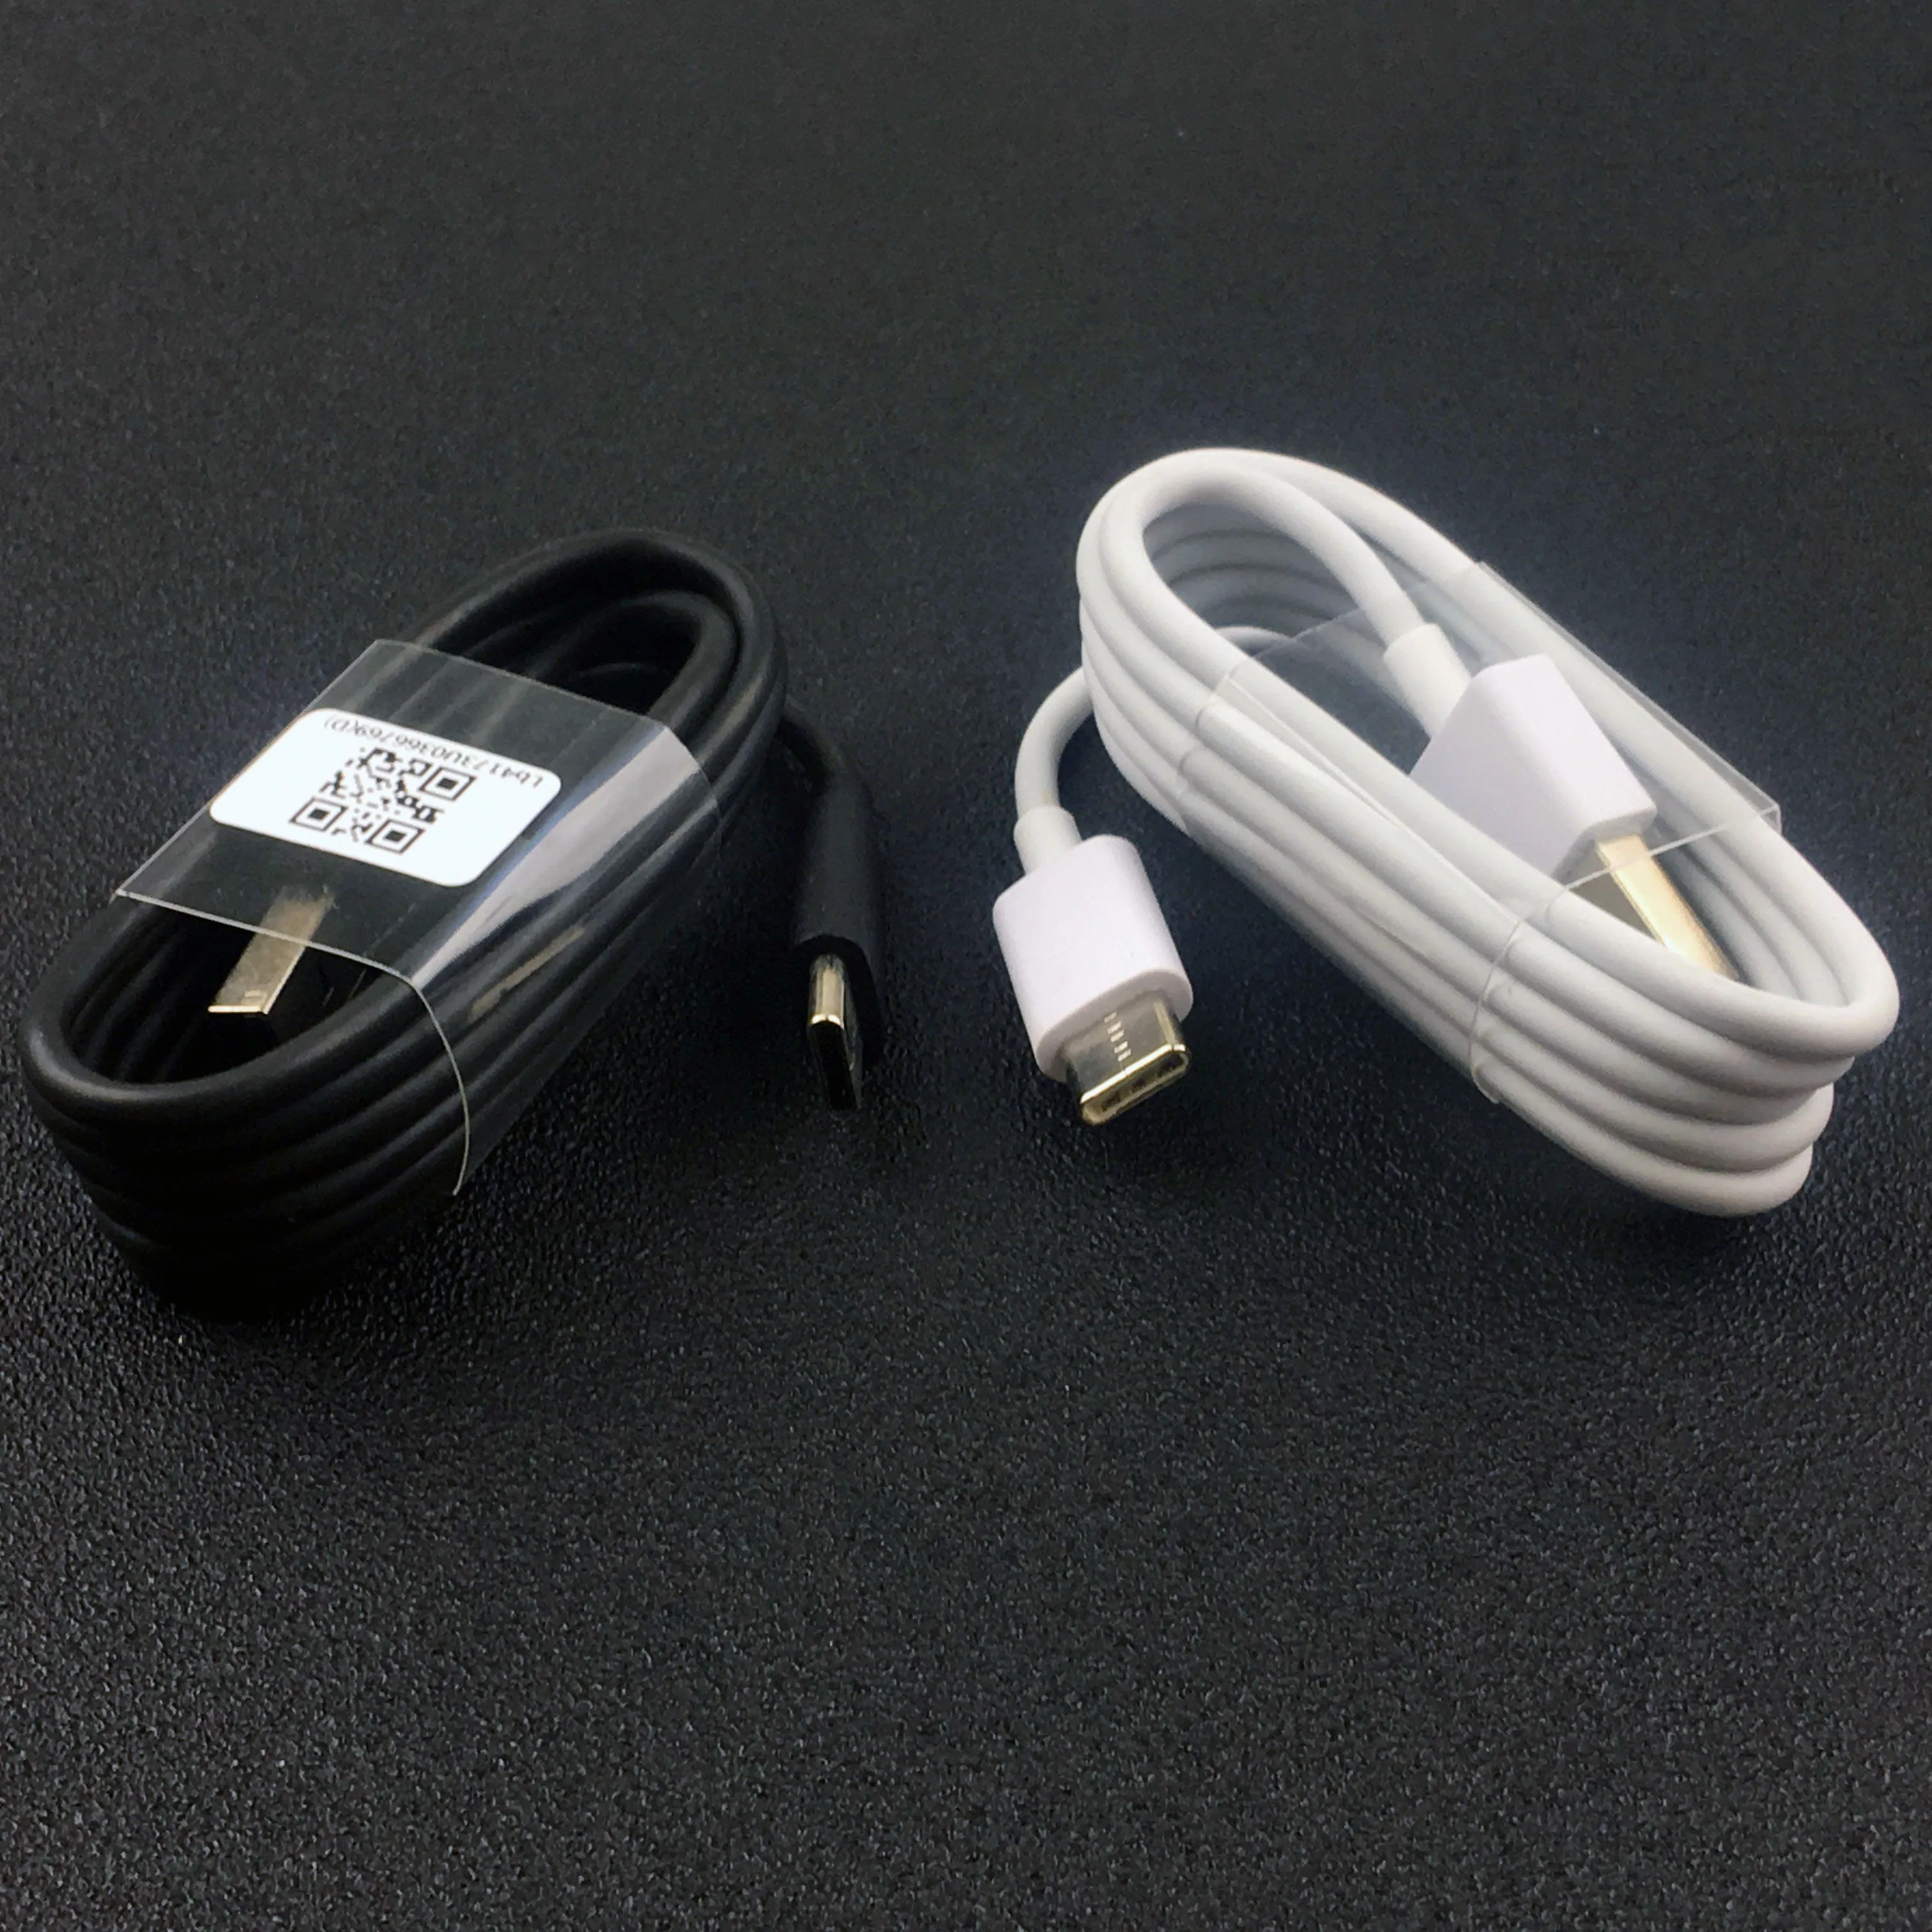 Original Xiaomi Mi Max 3 Fast Charger cable For mi 9 se 8 6 6x redmi note 7 pro mi x max 2 2 s 3 100cm Type C Data Cable